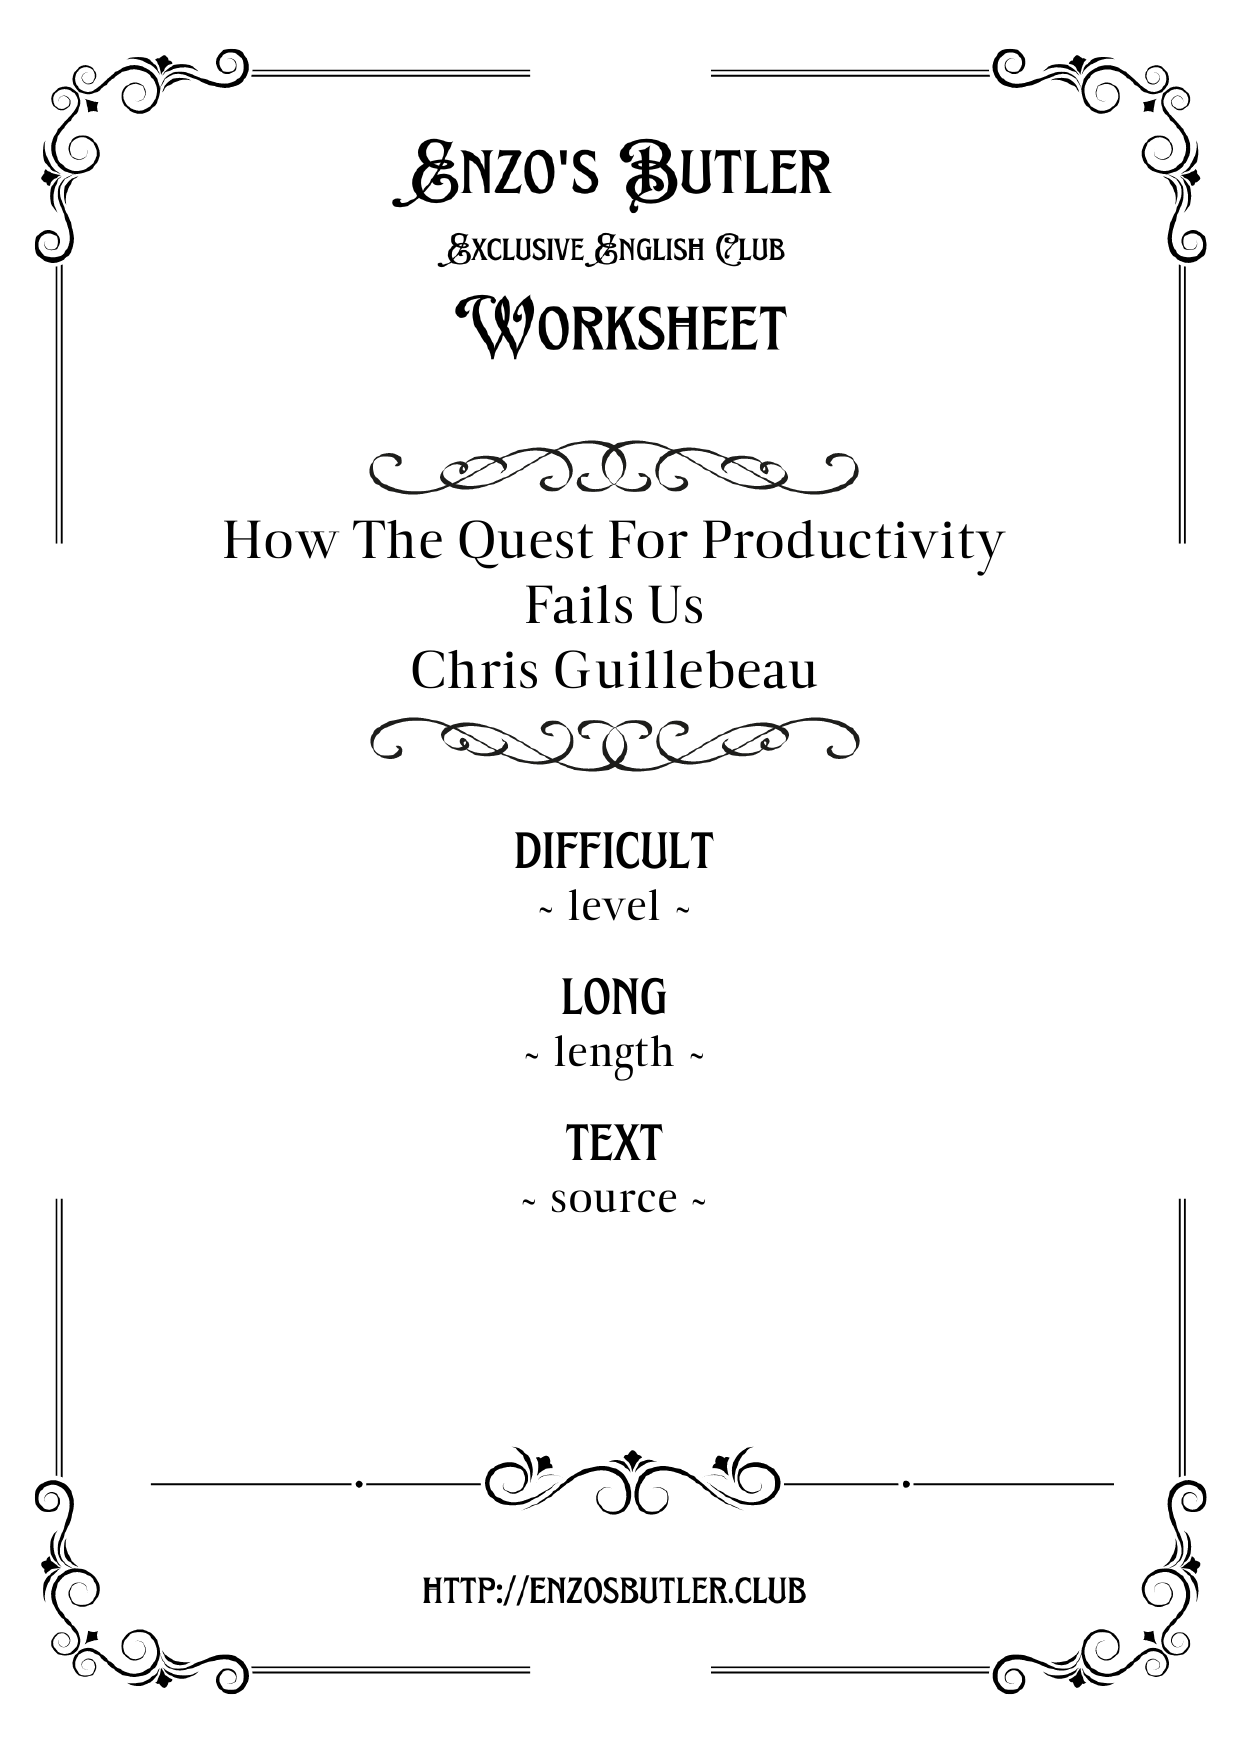 How the Quest for Productivity Fails Us by Chris Guillebeau ~ English Worksheet